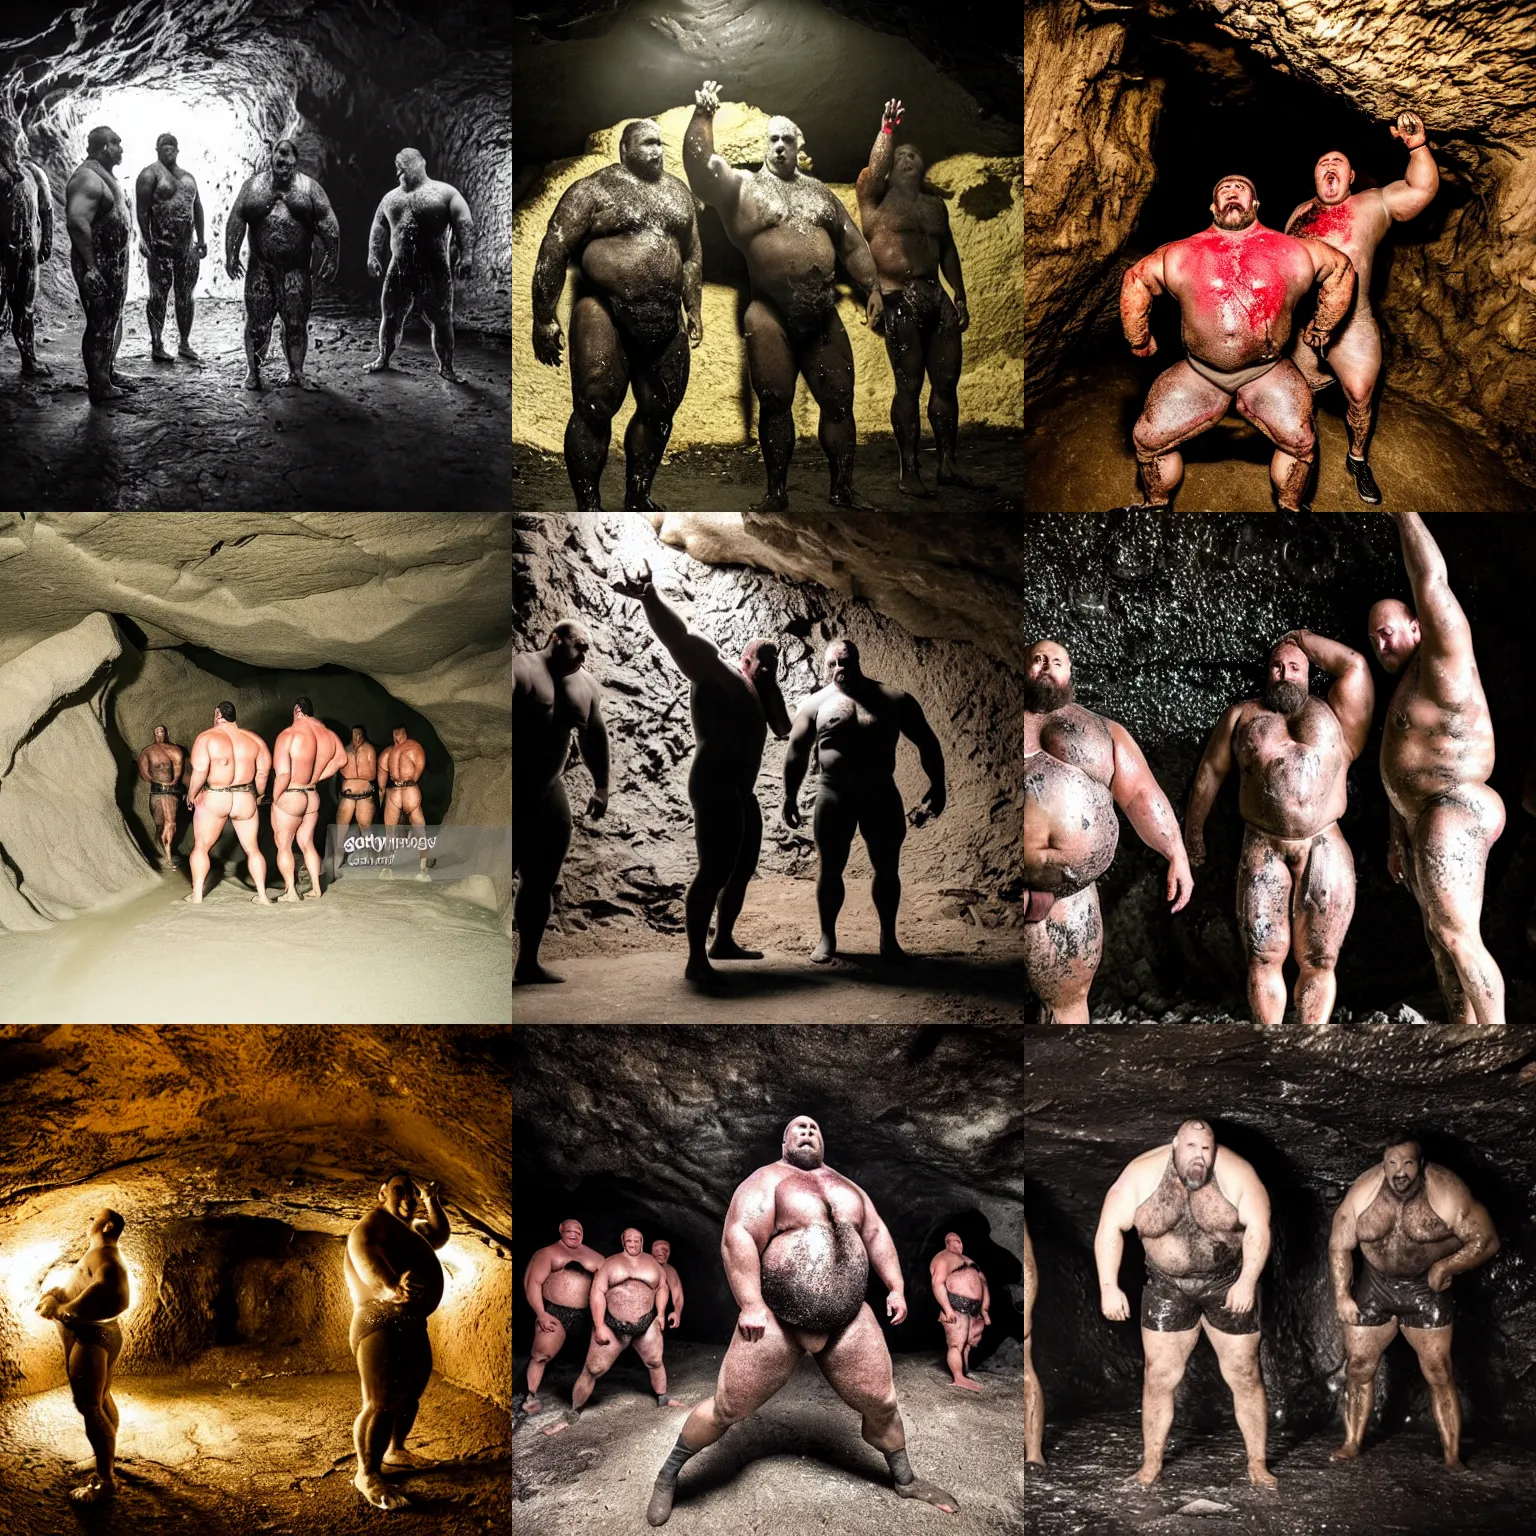 Prompt: burly strongmen standing in a dark cave covered in goo - like substance and in trance, photography